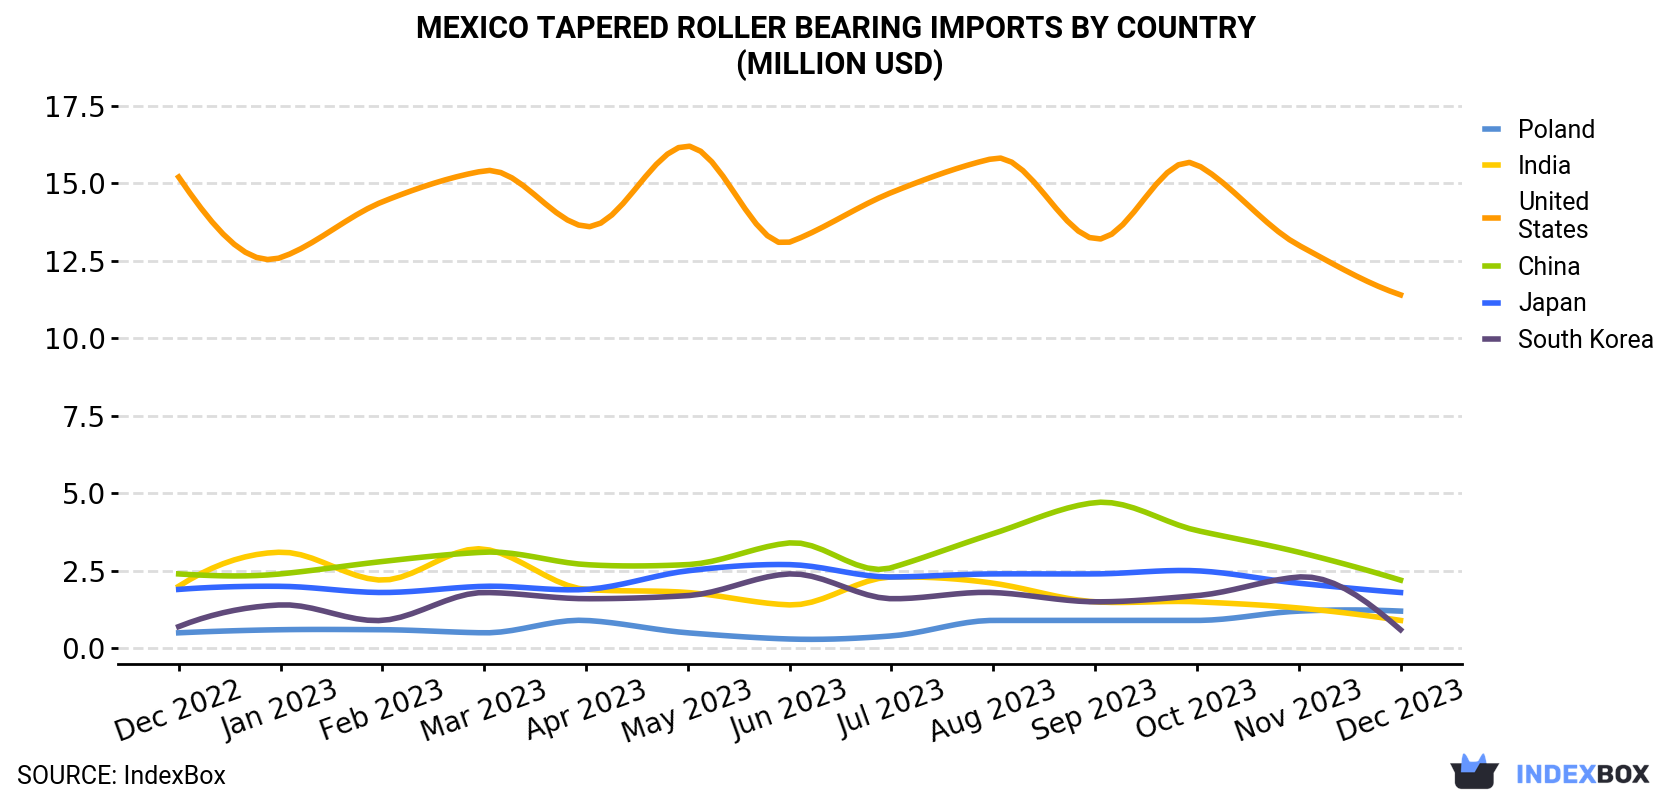 Mexico Tapered Roller Bearing Imports By Country (Million USD)